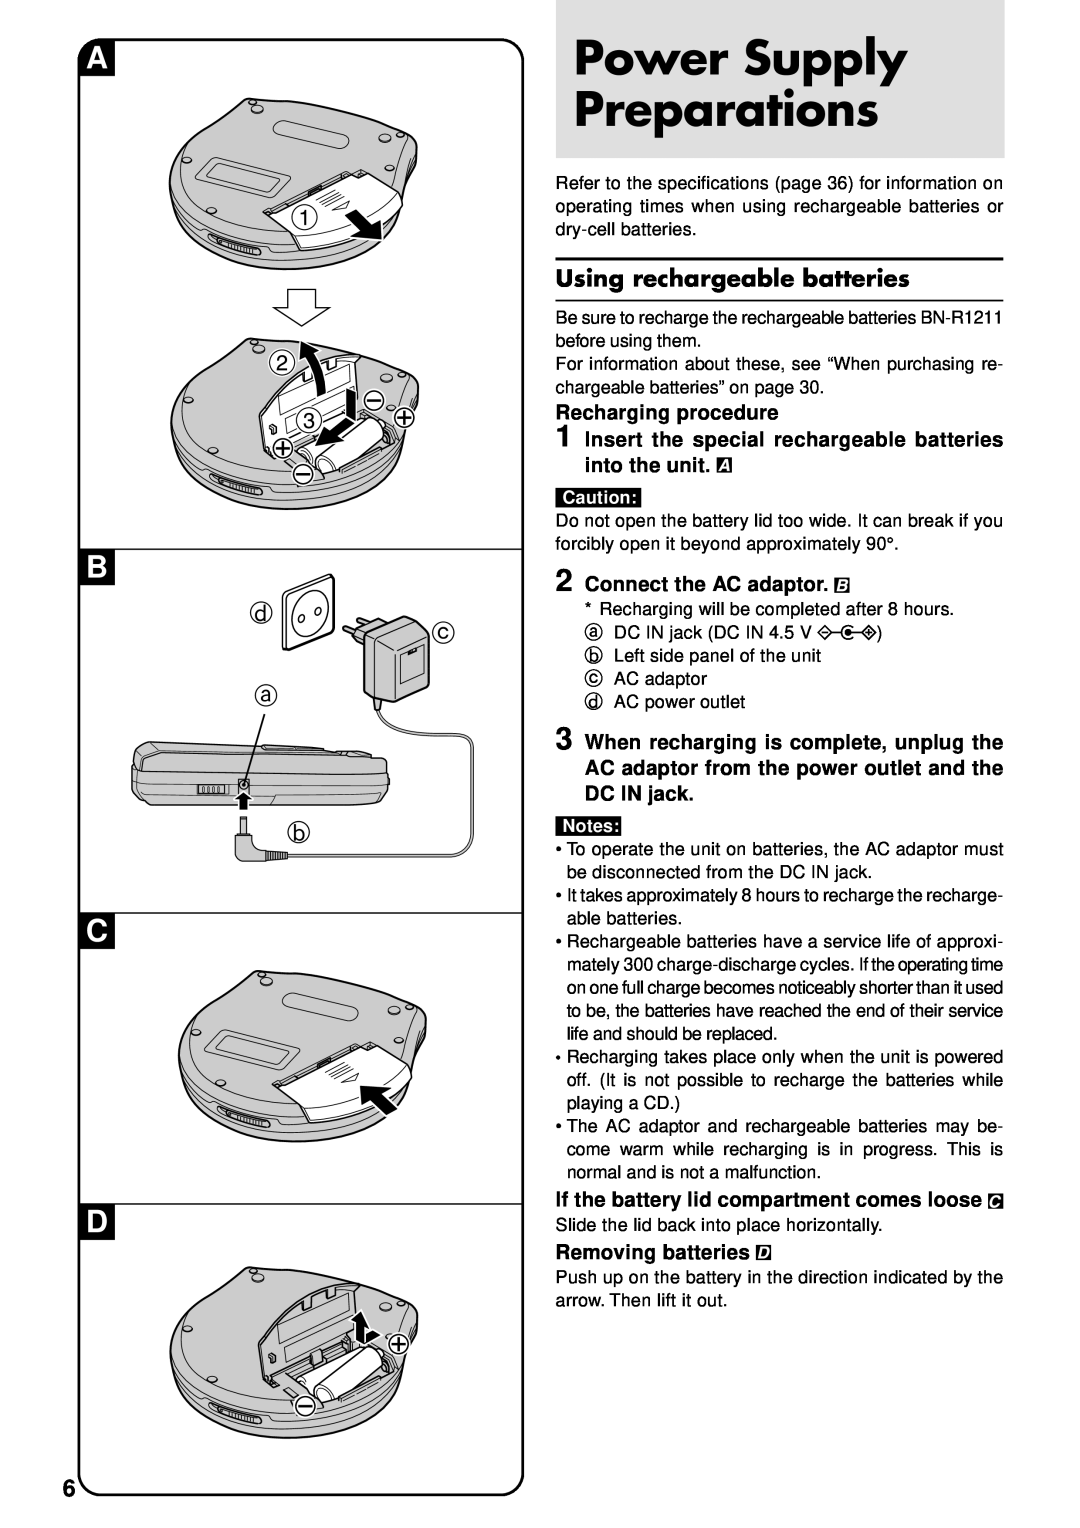 JVC XL-PG31, XL-PG51, XL-PV310 operating instructions Power Supply Preparations, d c a b, Using rechargeable batteries 